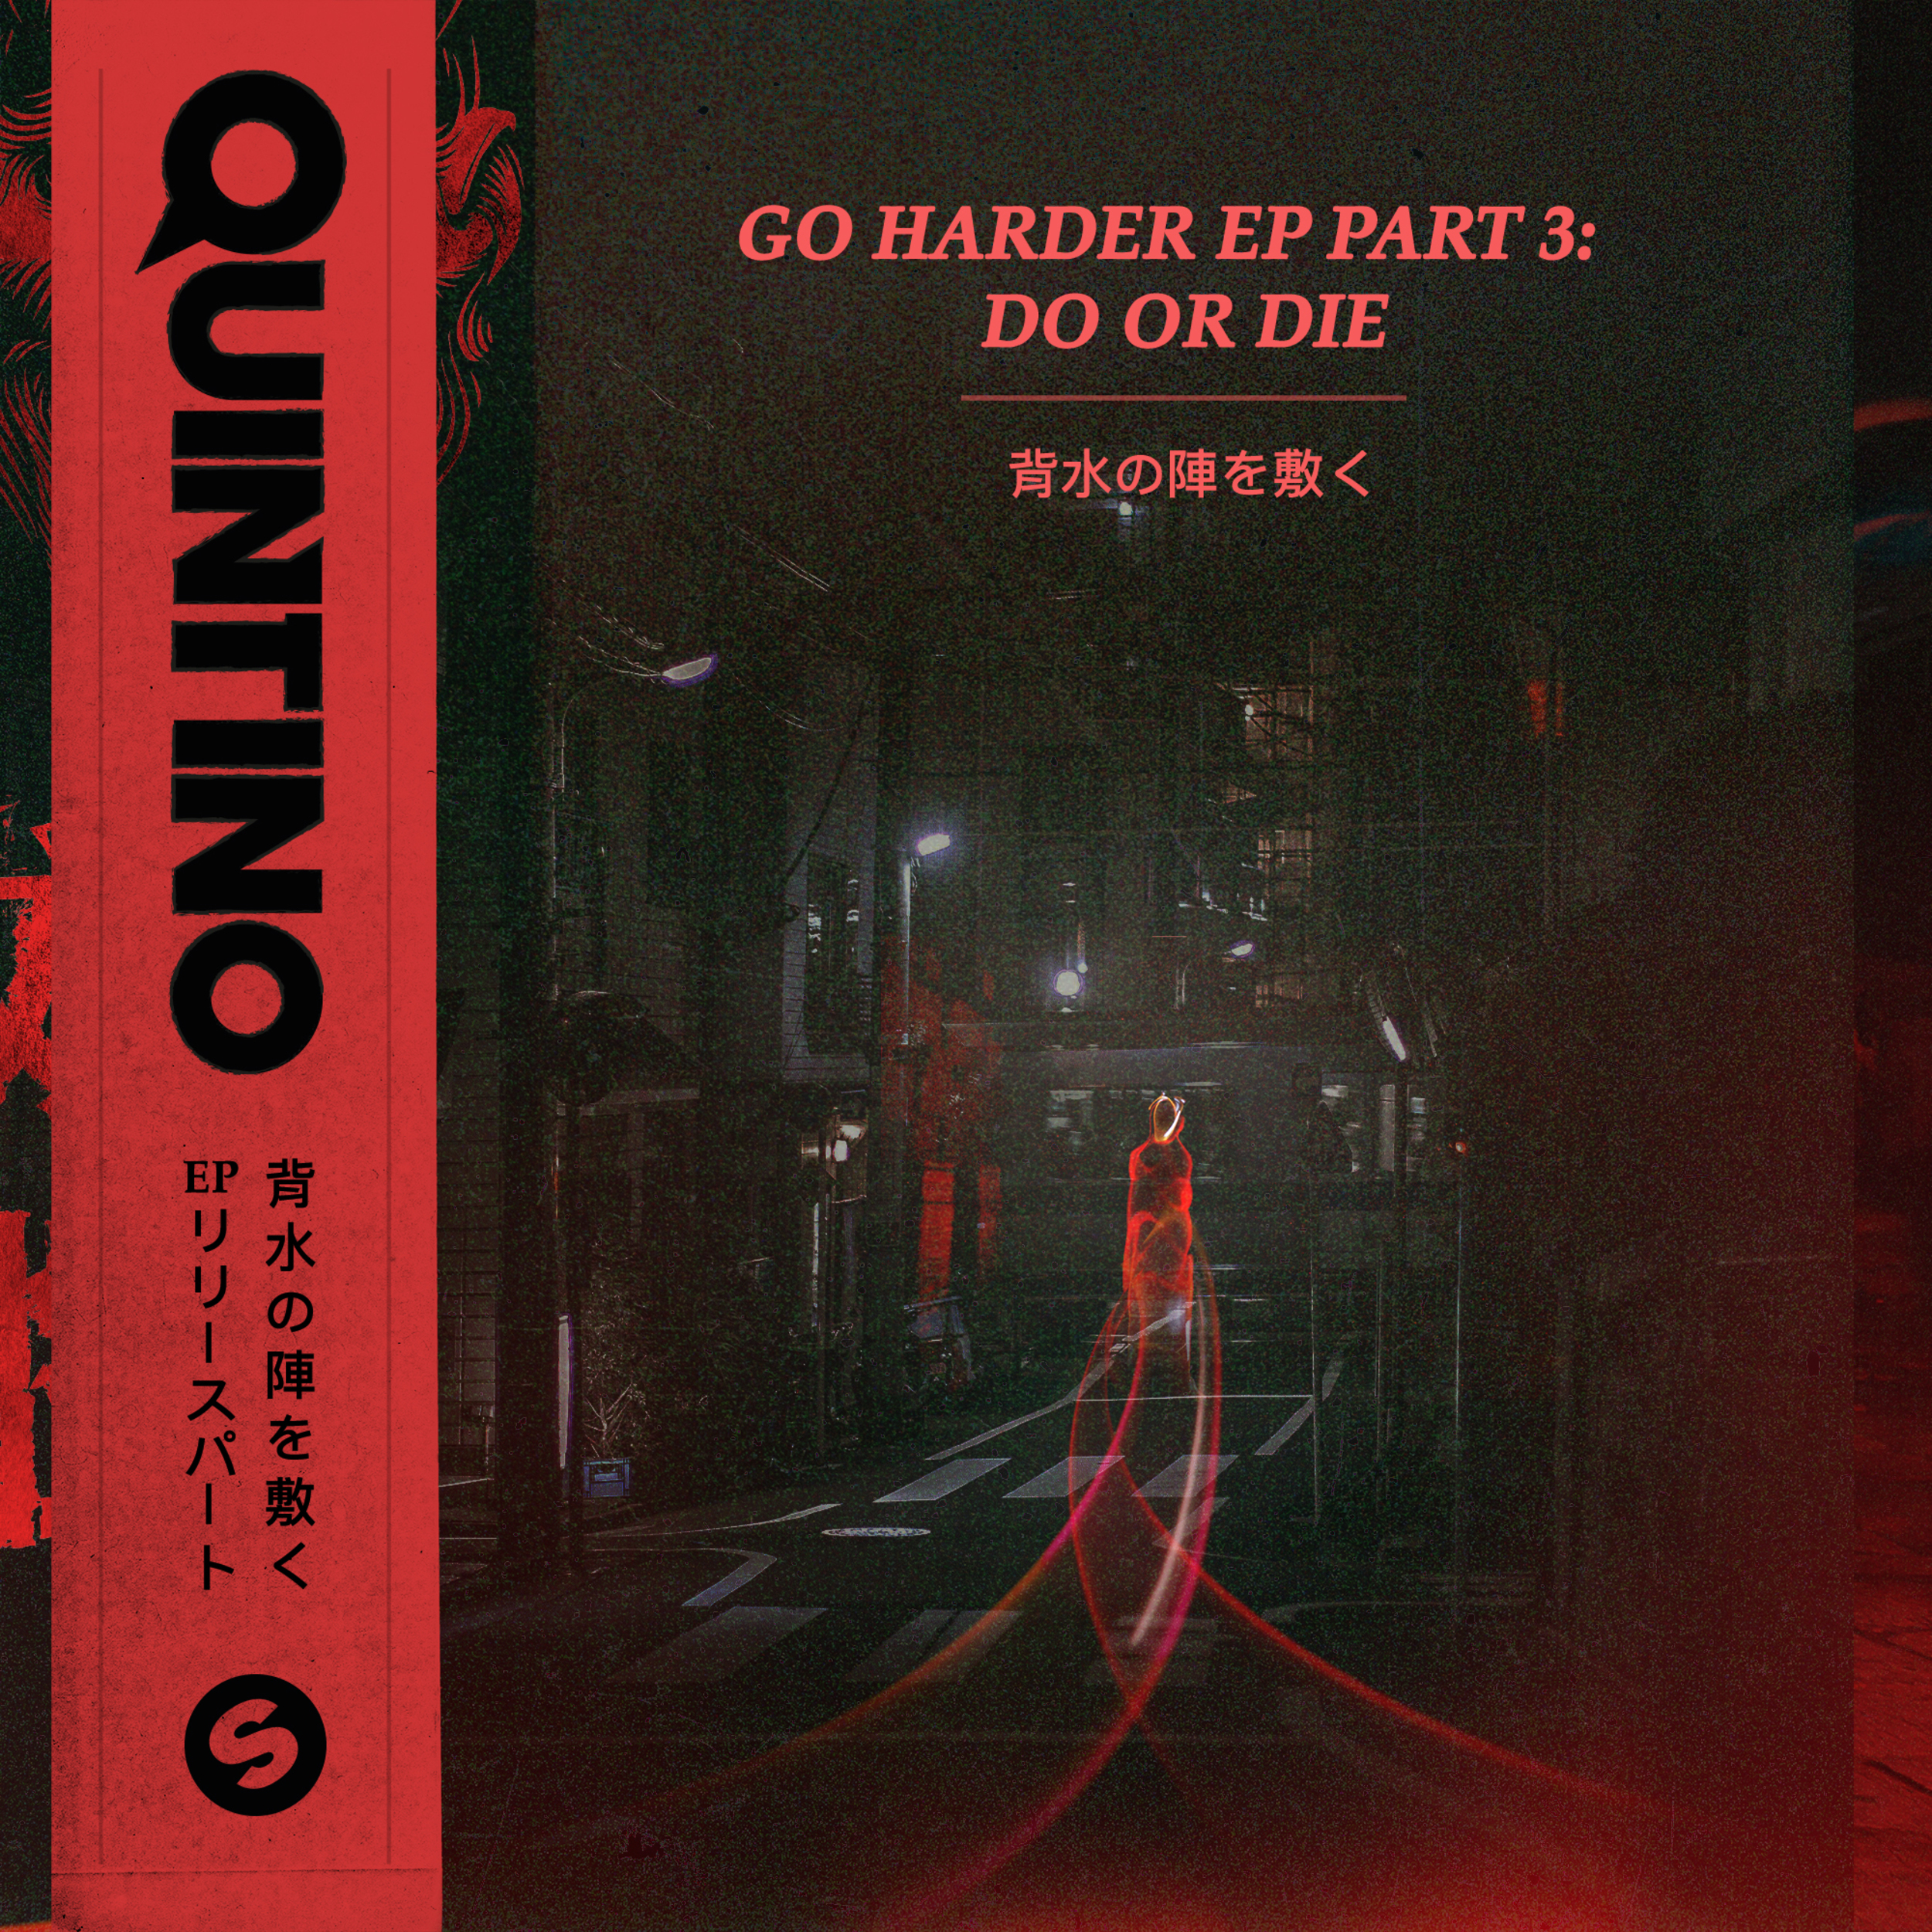 GO HARDER EP PART 3: DO OR DIE